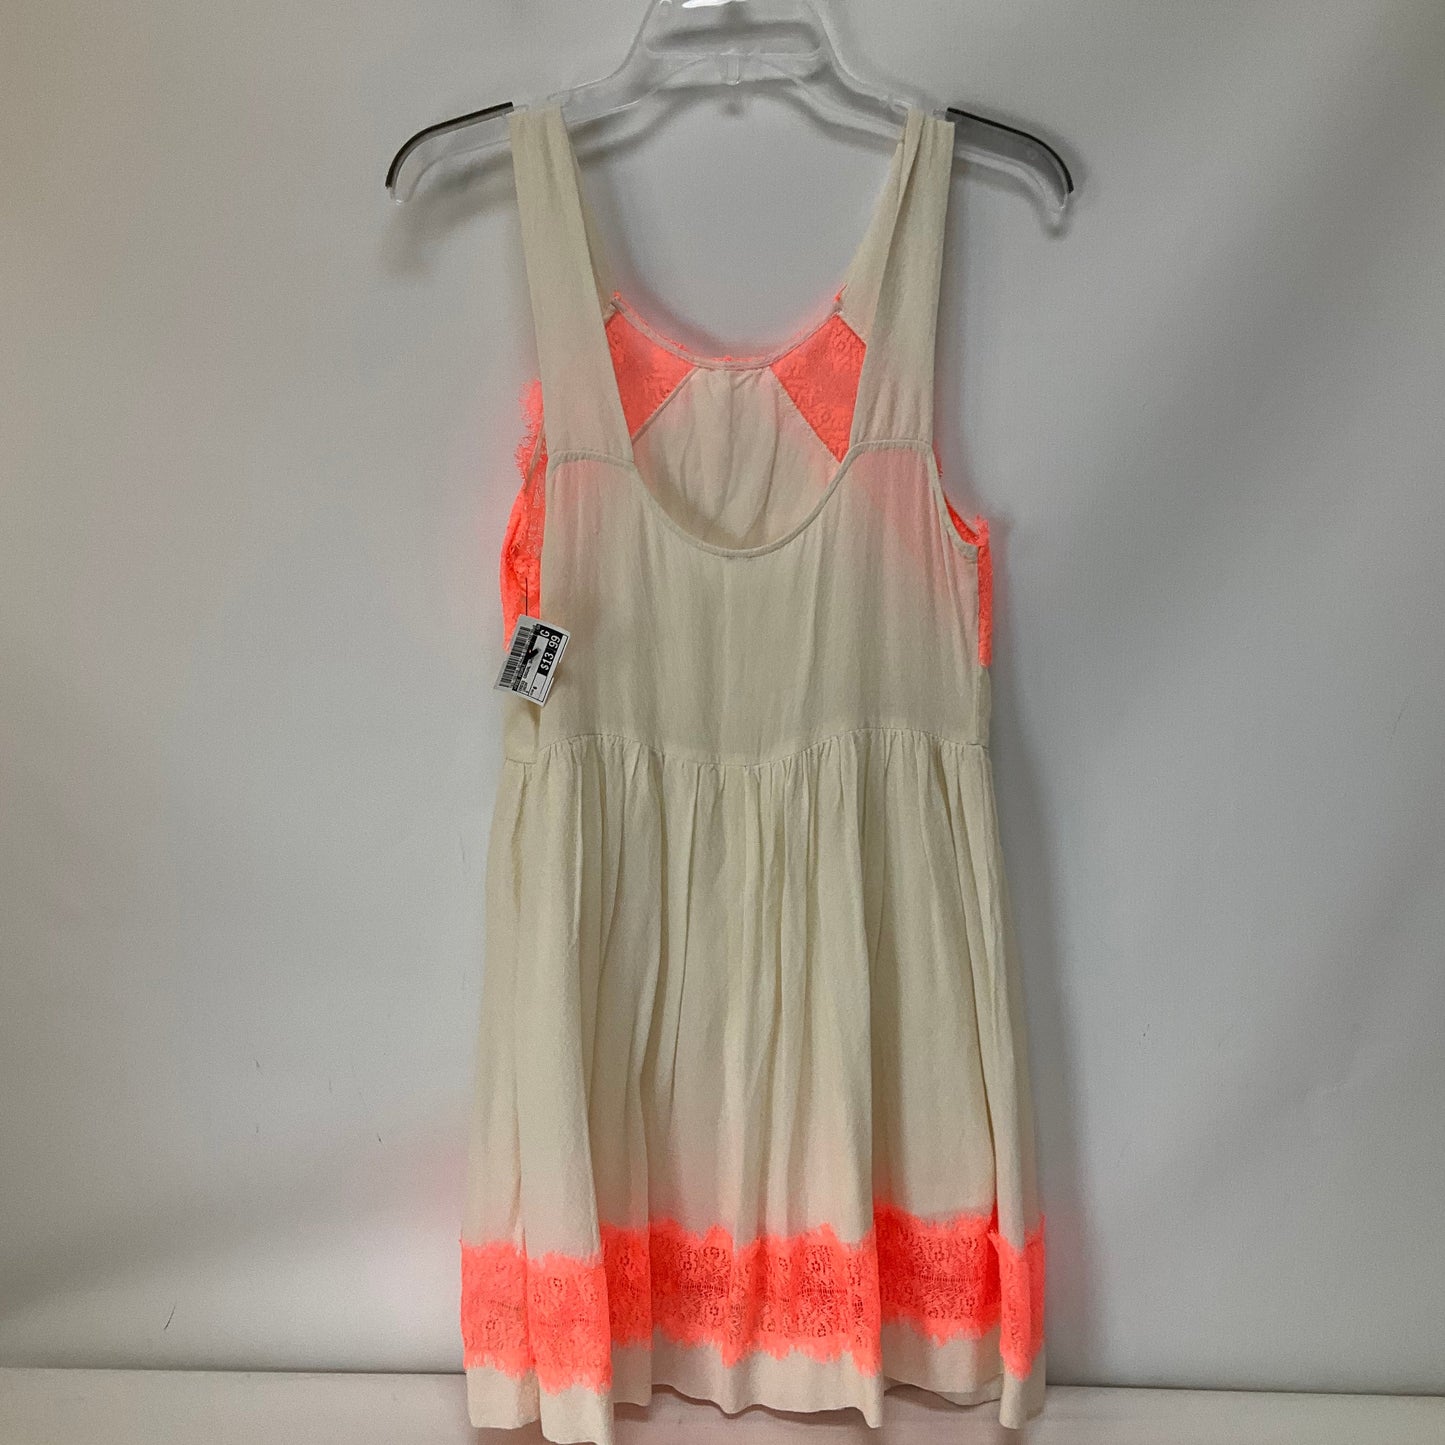 Cream Dress Casual Short Free People, Size 6